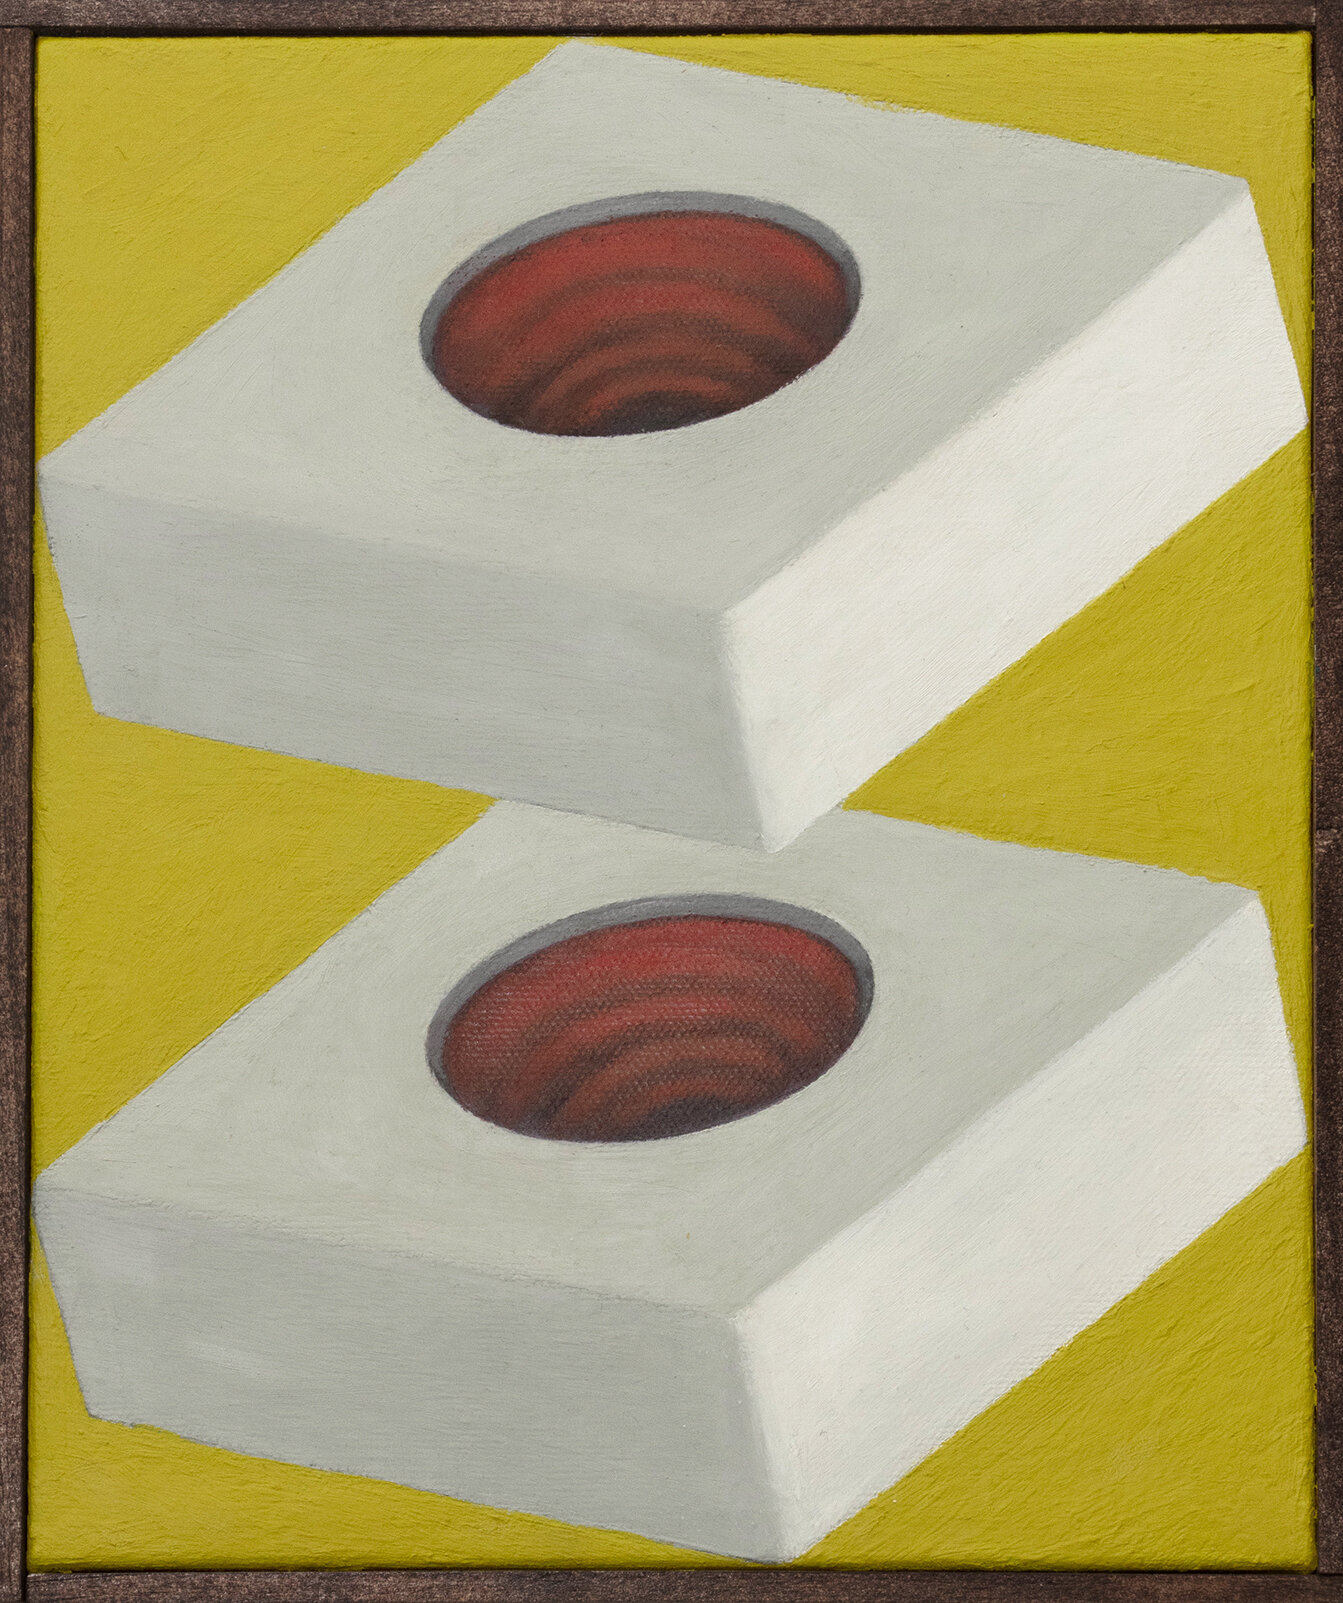   Endless Nut 1 , 2020 Oil on board, wood frame 8 x 10 inches 